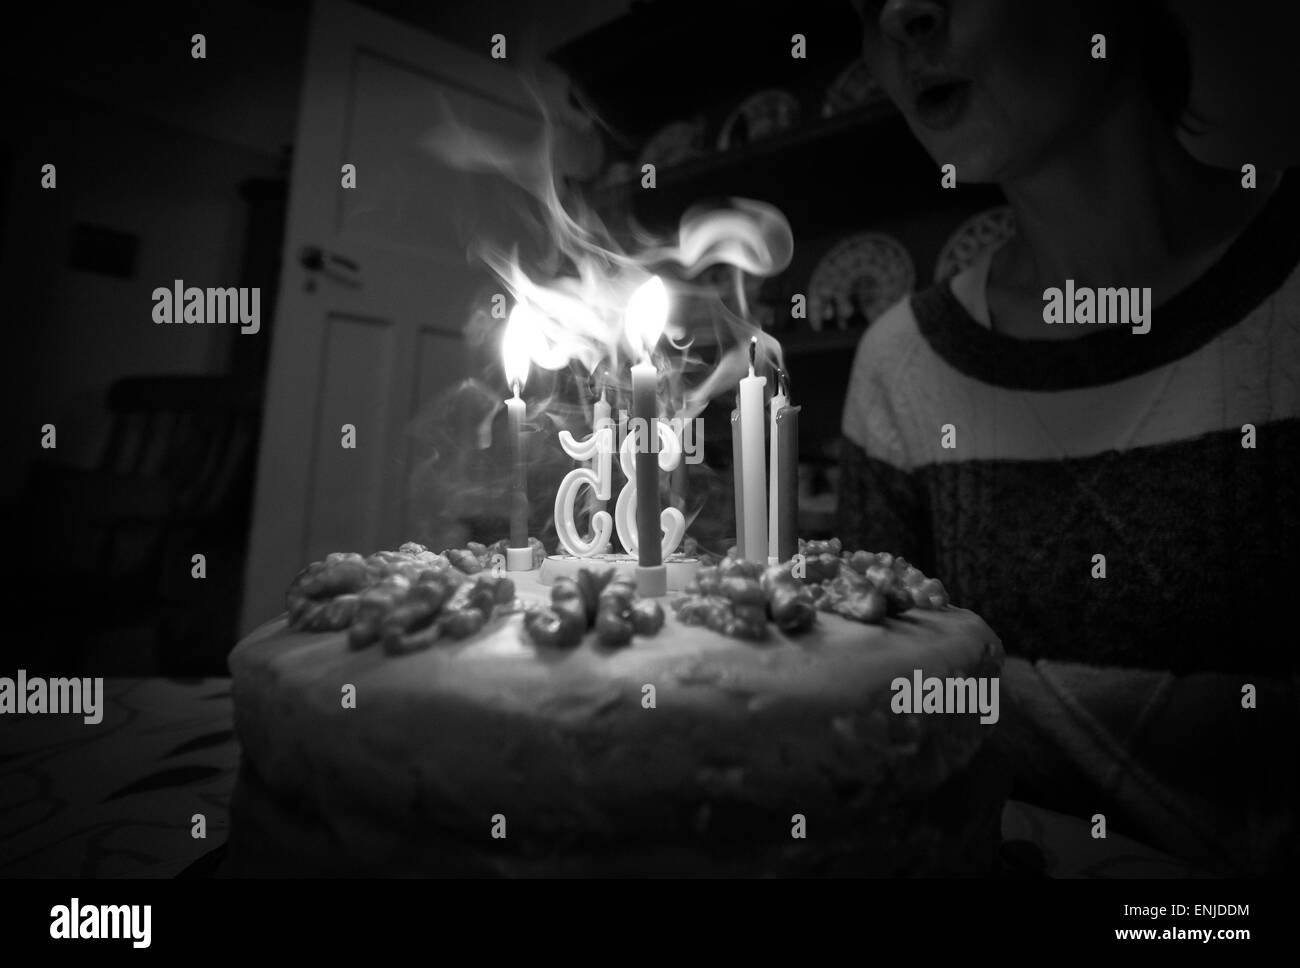 A woman blowing out candles on her birthday cake. Instagram type styling applied some light grain added. Stock Photo